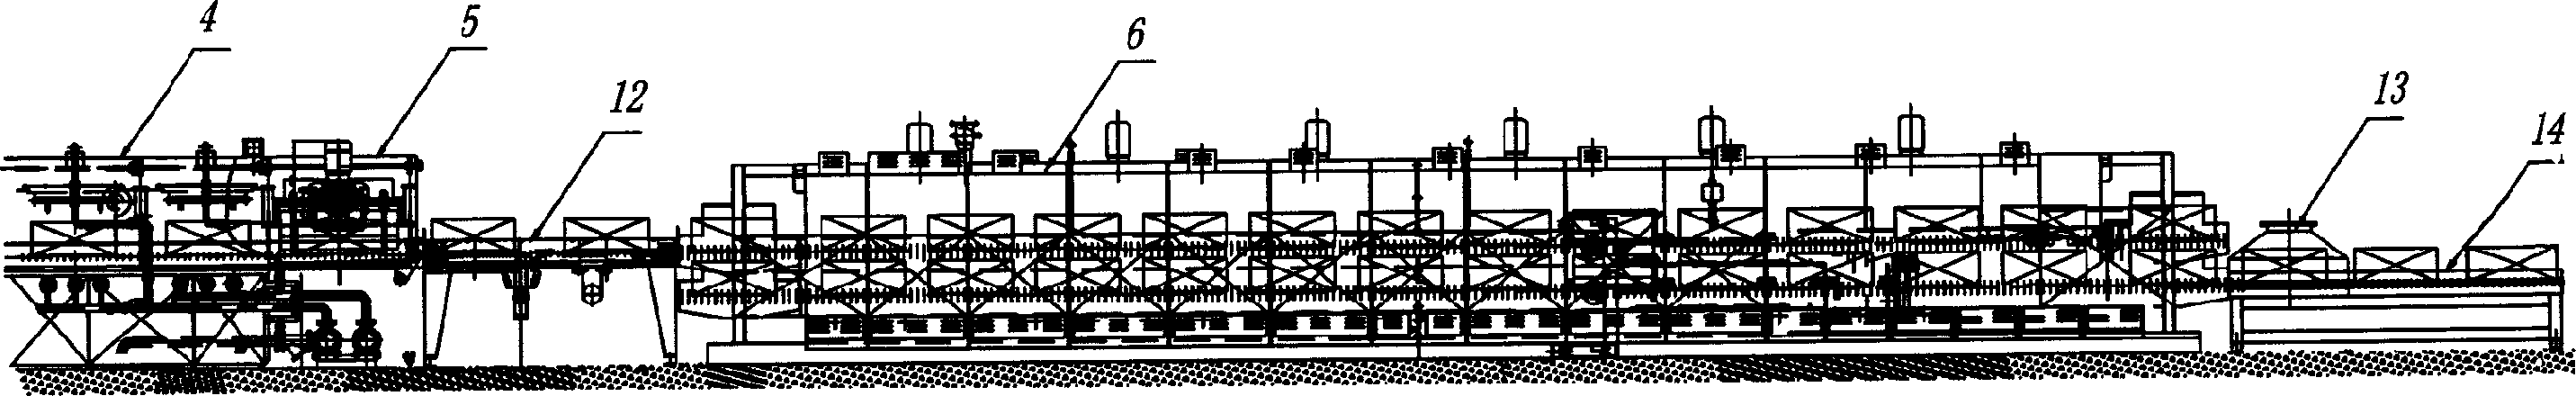 Stepped quenching process and its apparatus suitable for bainite and martensite quenching